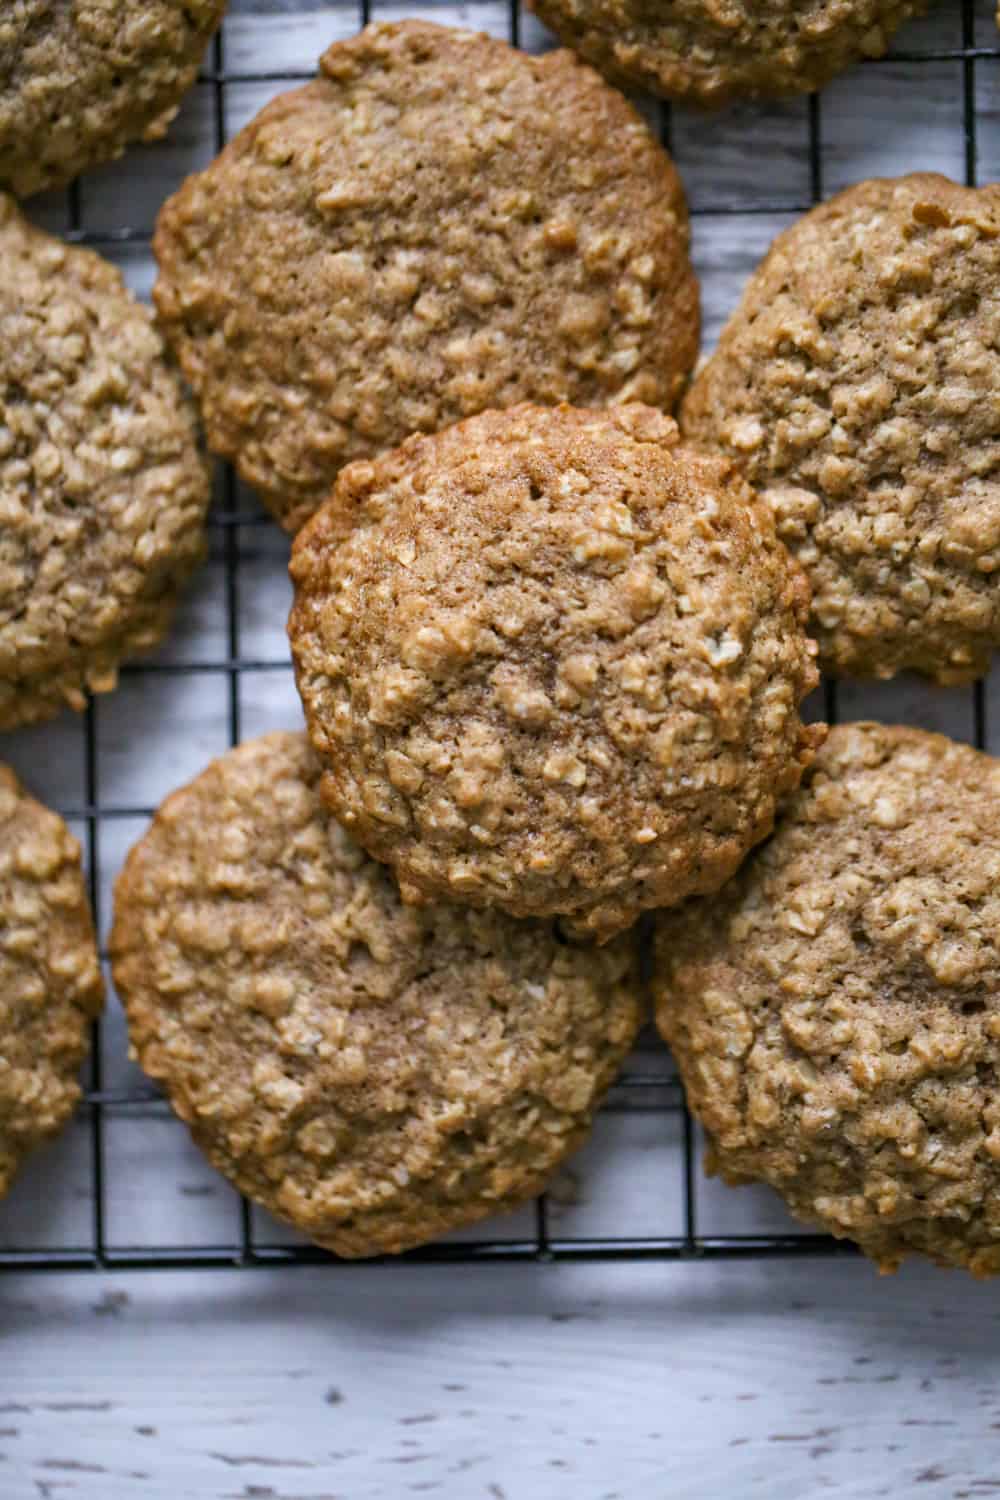 old fashioned oatmeal cookies